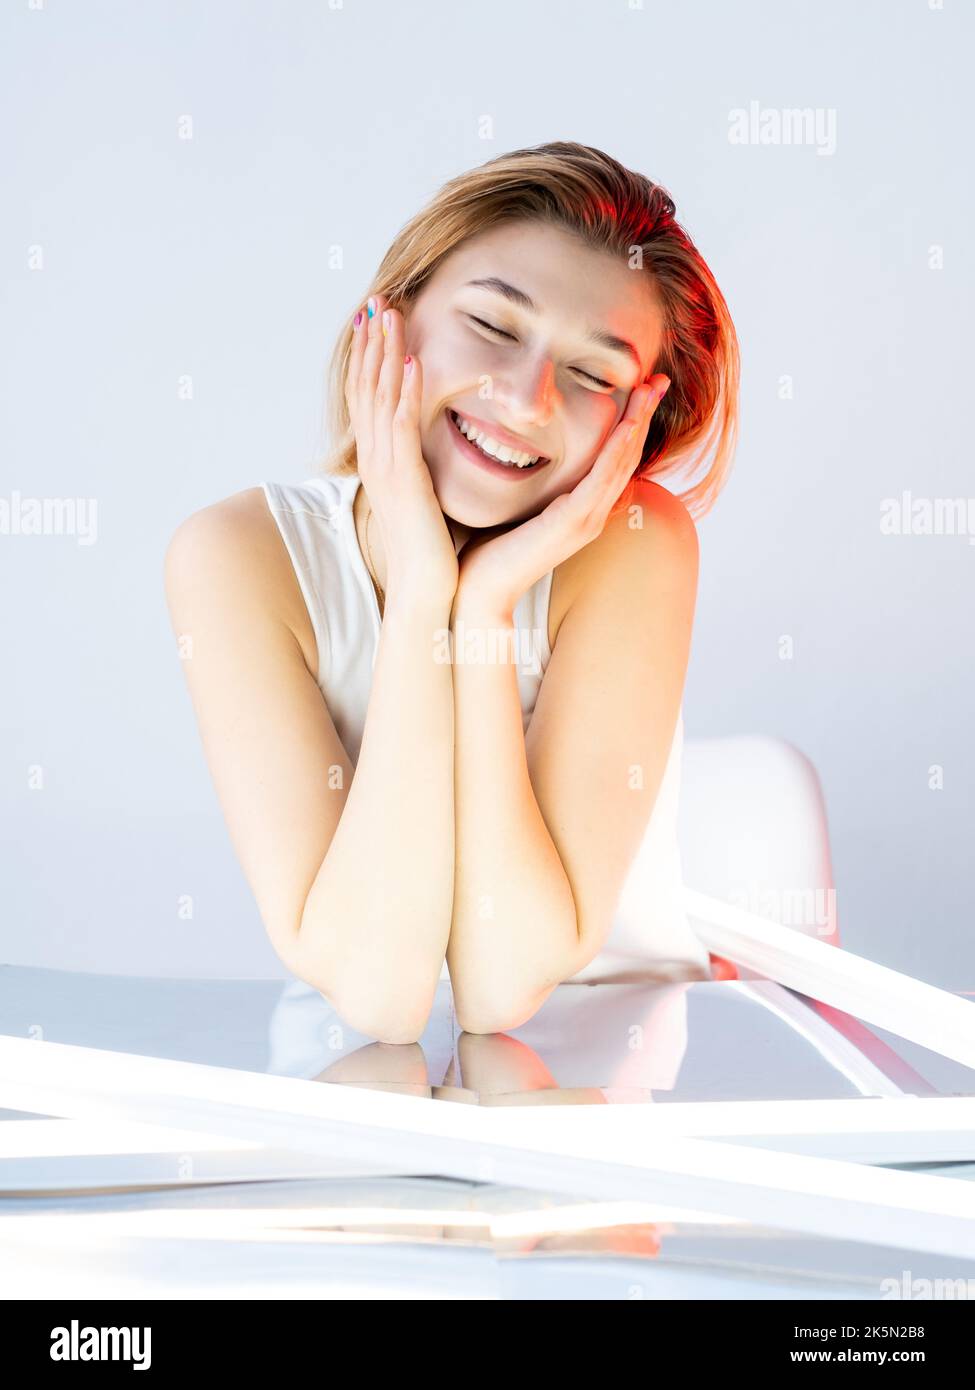 Beauty portrait. Facial care. Moisturizing nourishing. Happy satisfied smiling girl enjoying touching soft fresh face skin in red neon light isolated Stock Photo